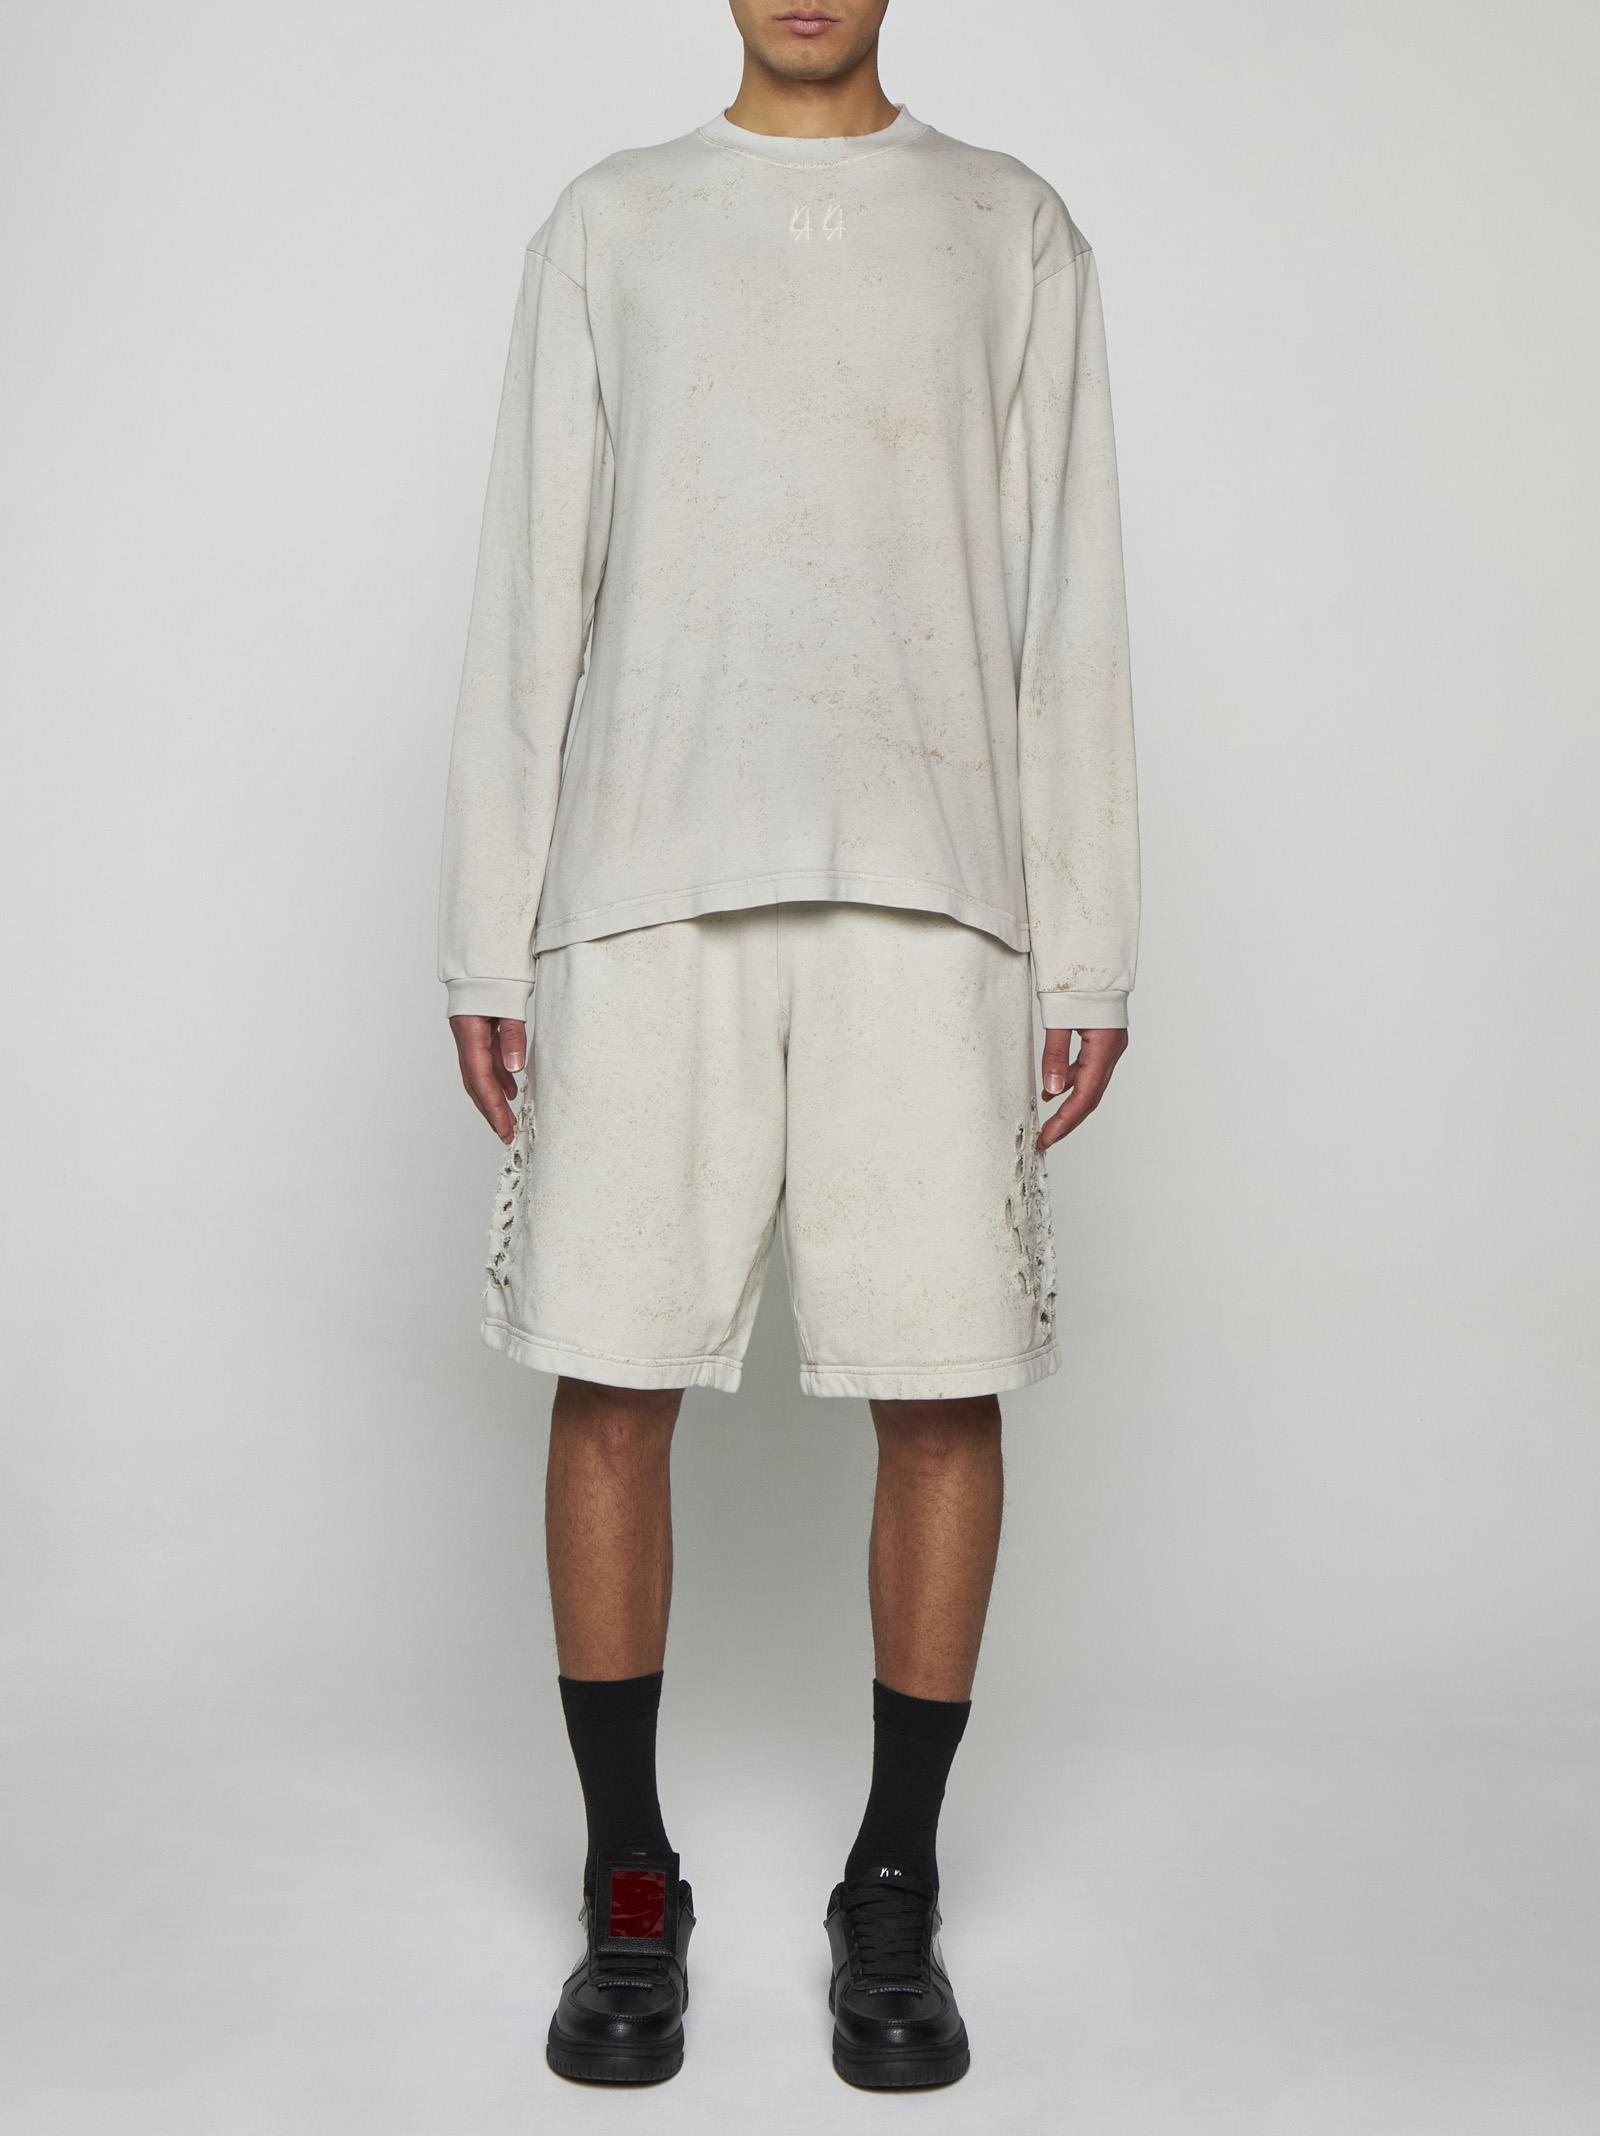 Shop 44 Label Group Back Holes Cotton Sweatshirt In Dirty White+gyps